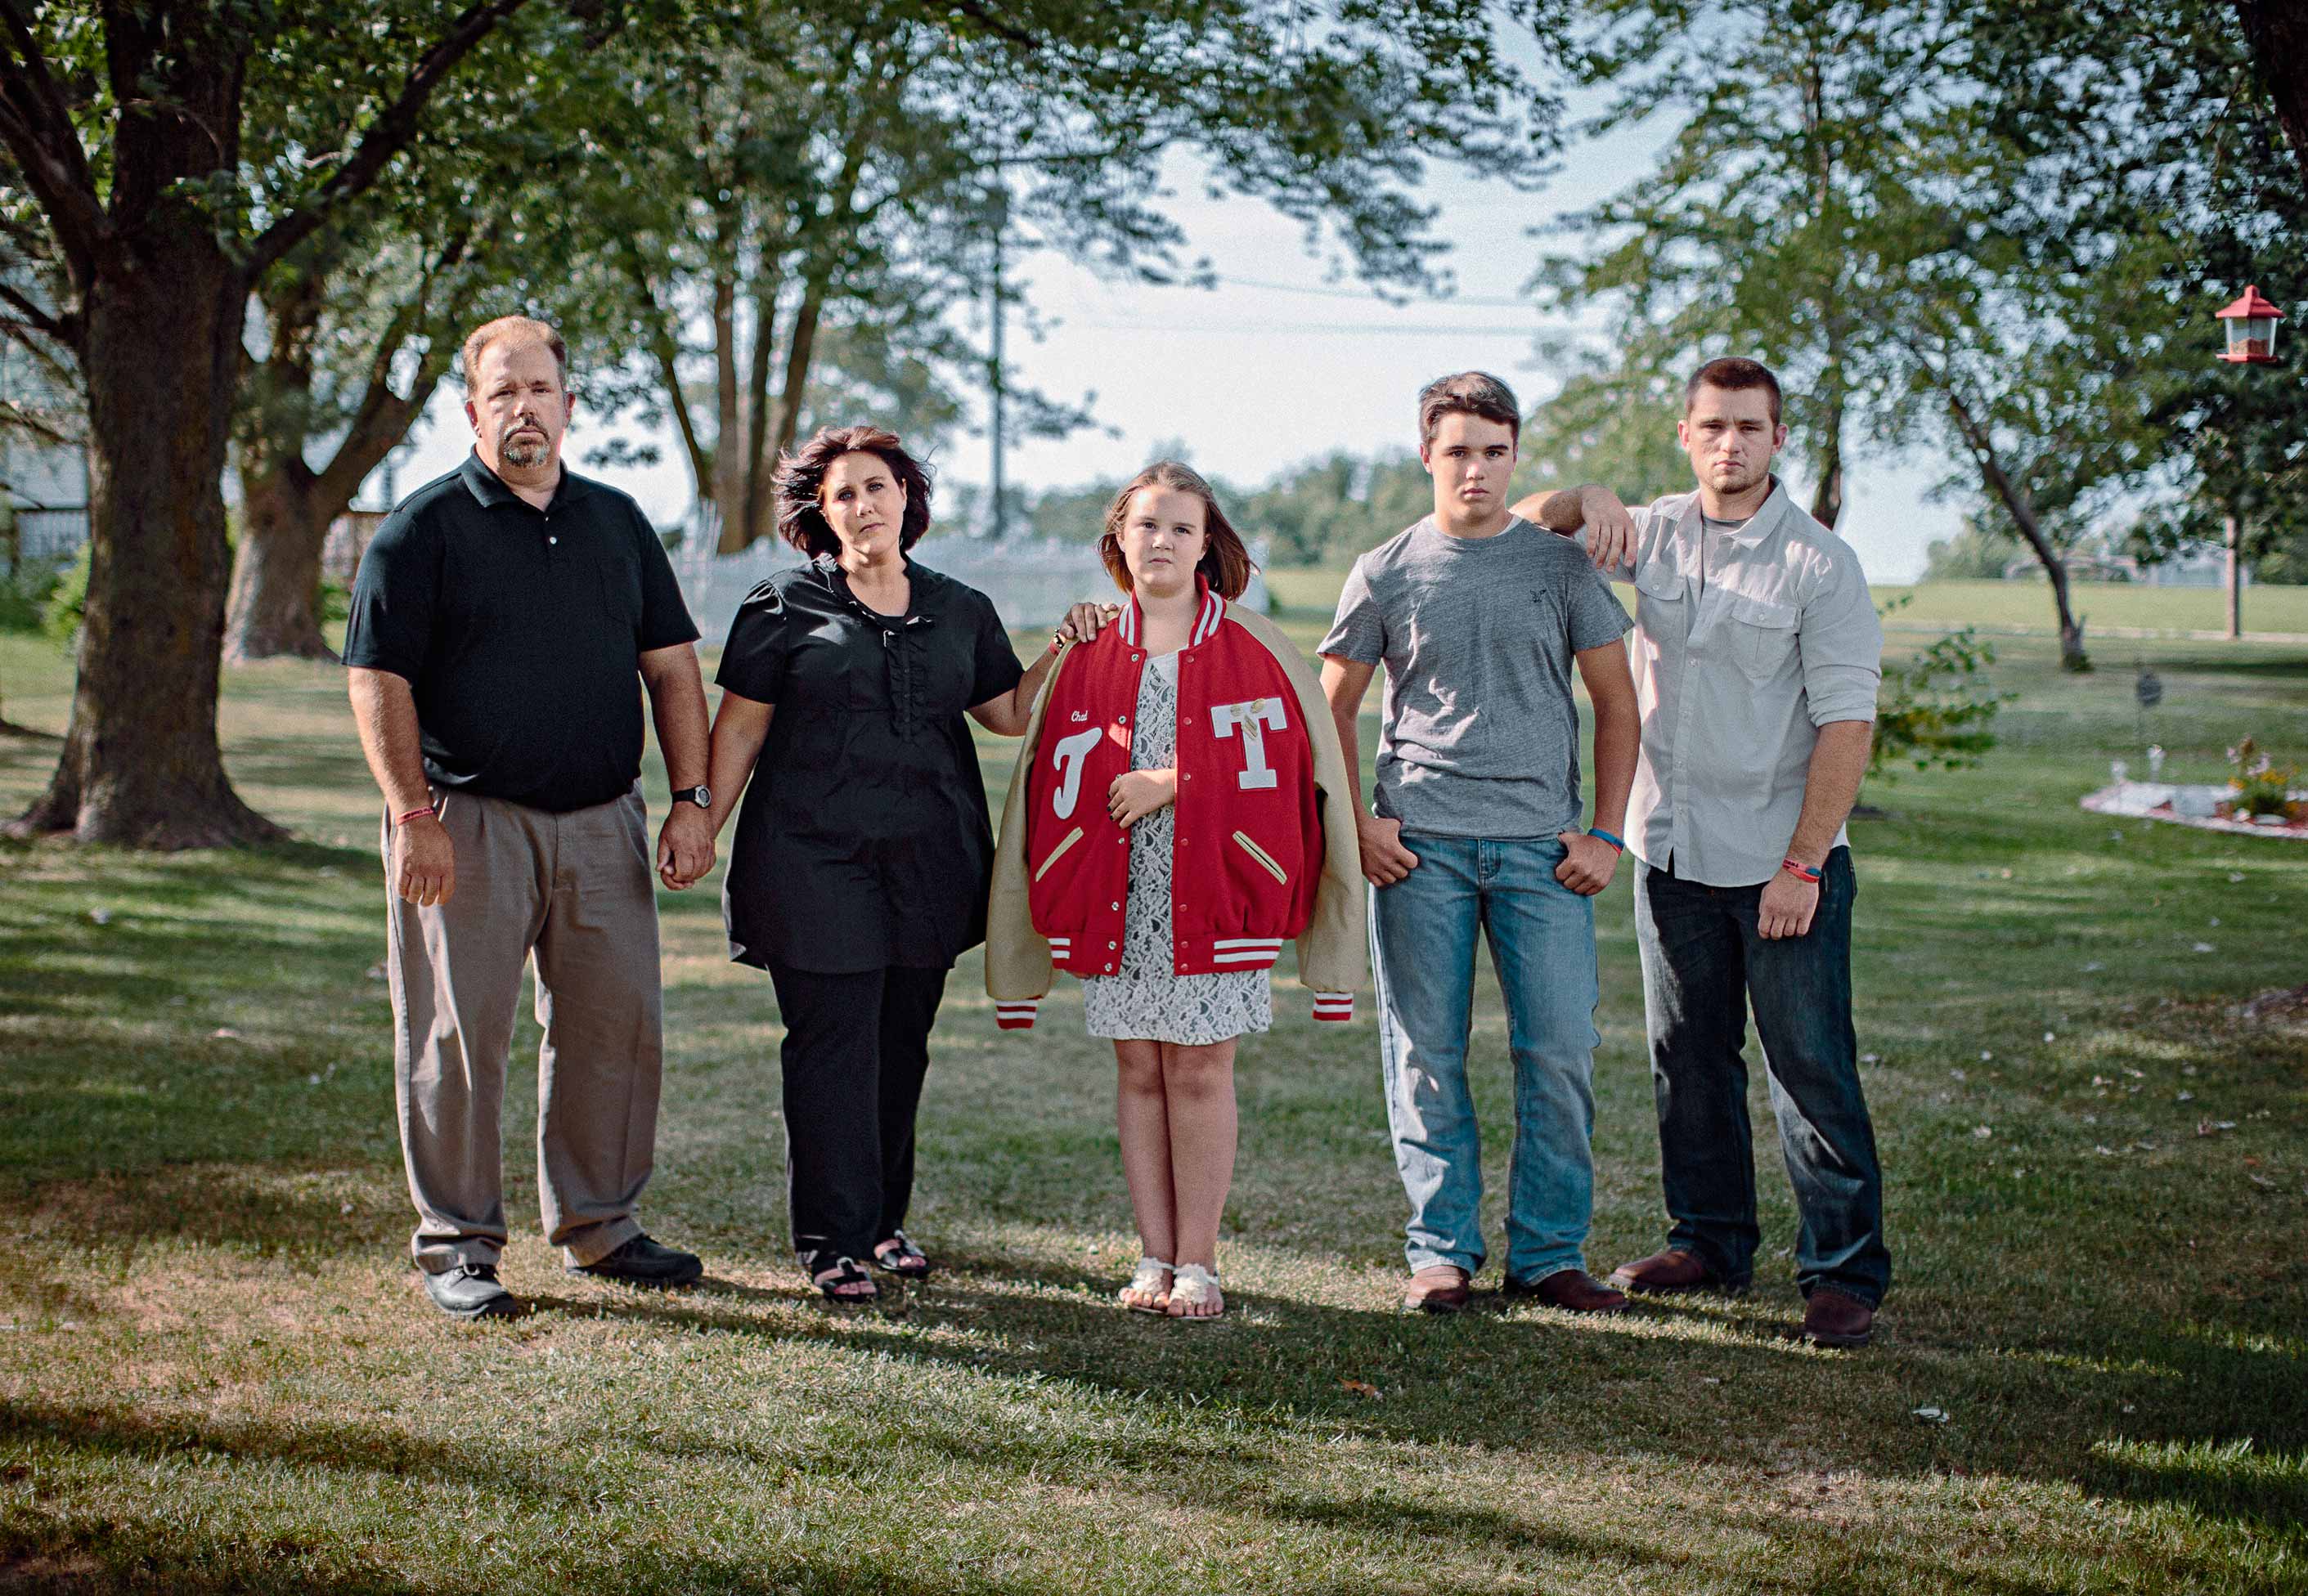 From left: Chad’s father Ken, mother Amy and siblings Mandy, Kenton and Zane in the family’s yard in central Missouri. Kenton, a high school freshman, has given up football. Photographed in Tipton, Mo, in 2014. (Bryan Schutmaat for TIME)